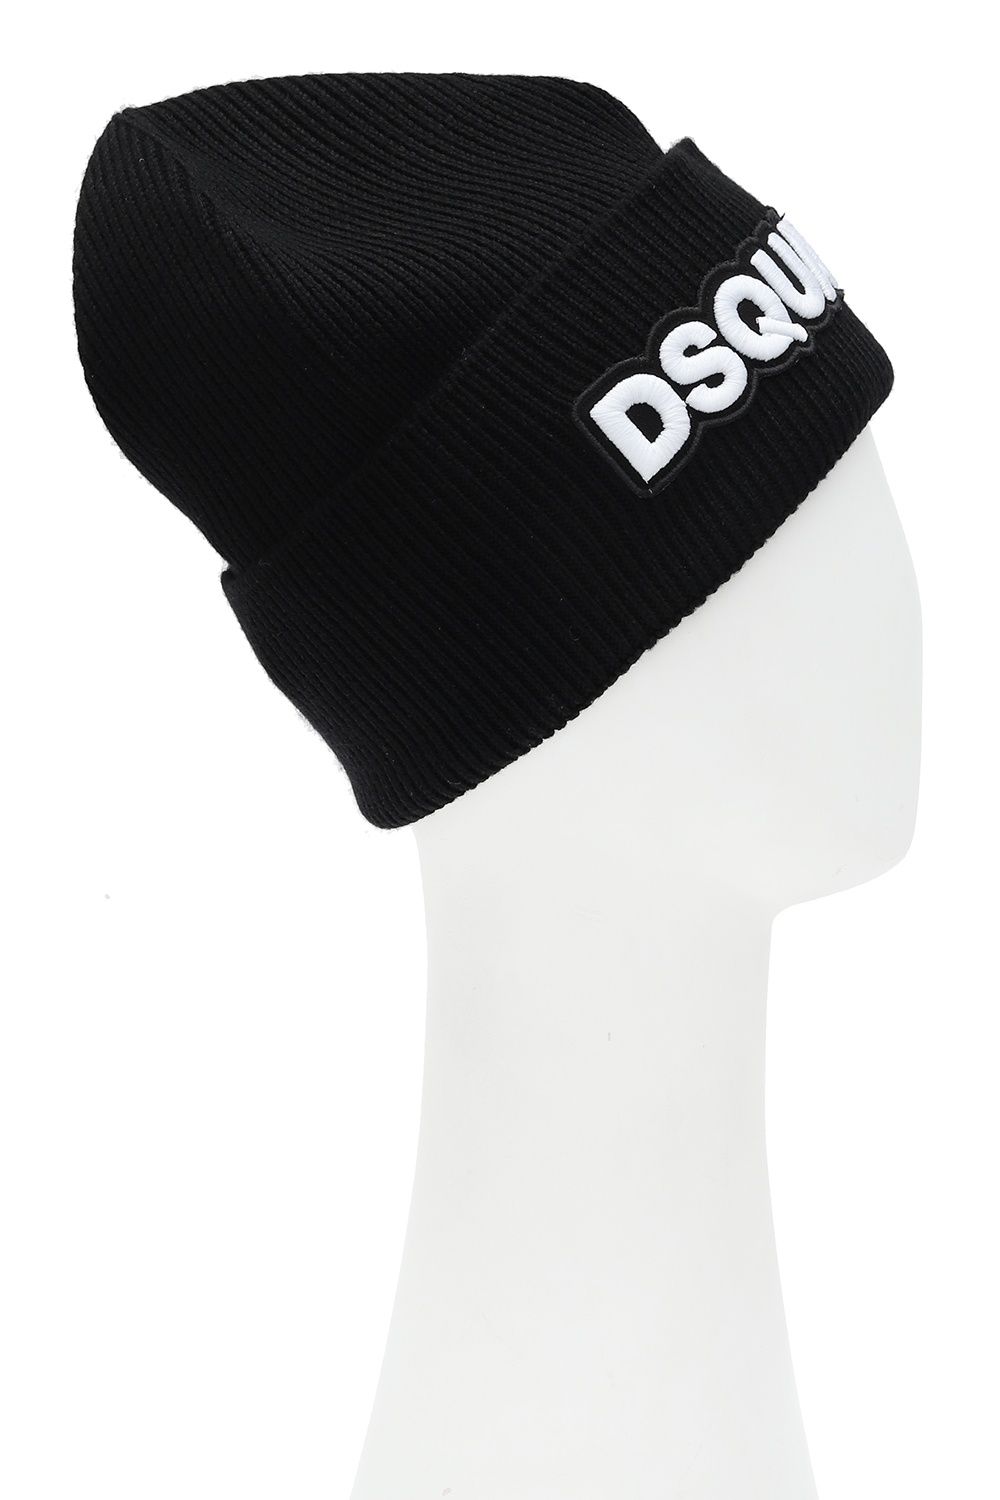 Dsquared2 Branded accessory hat